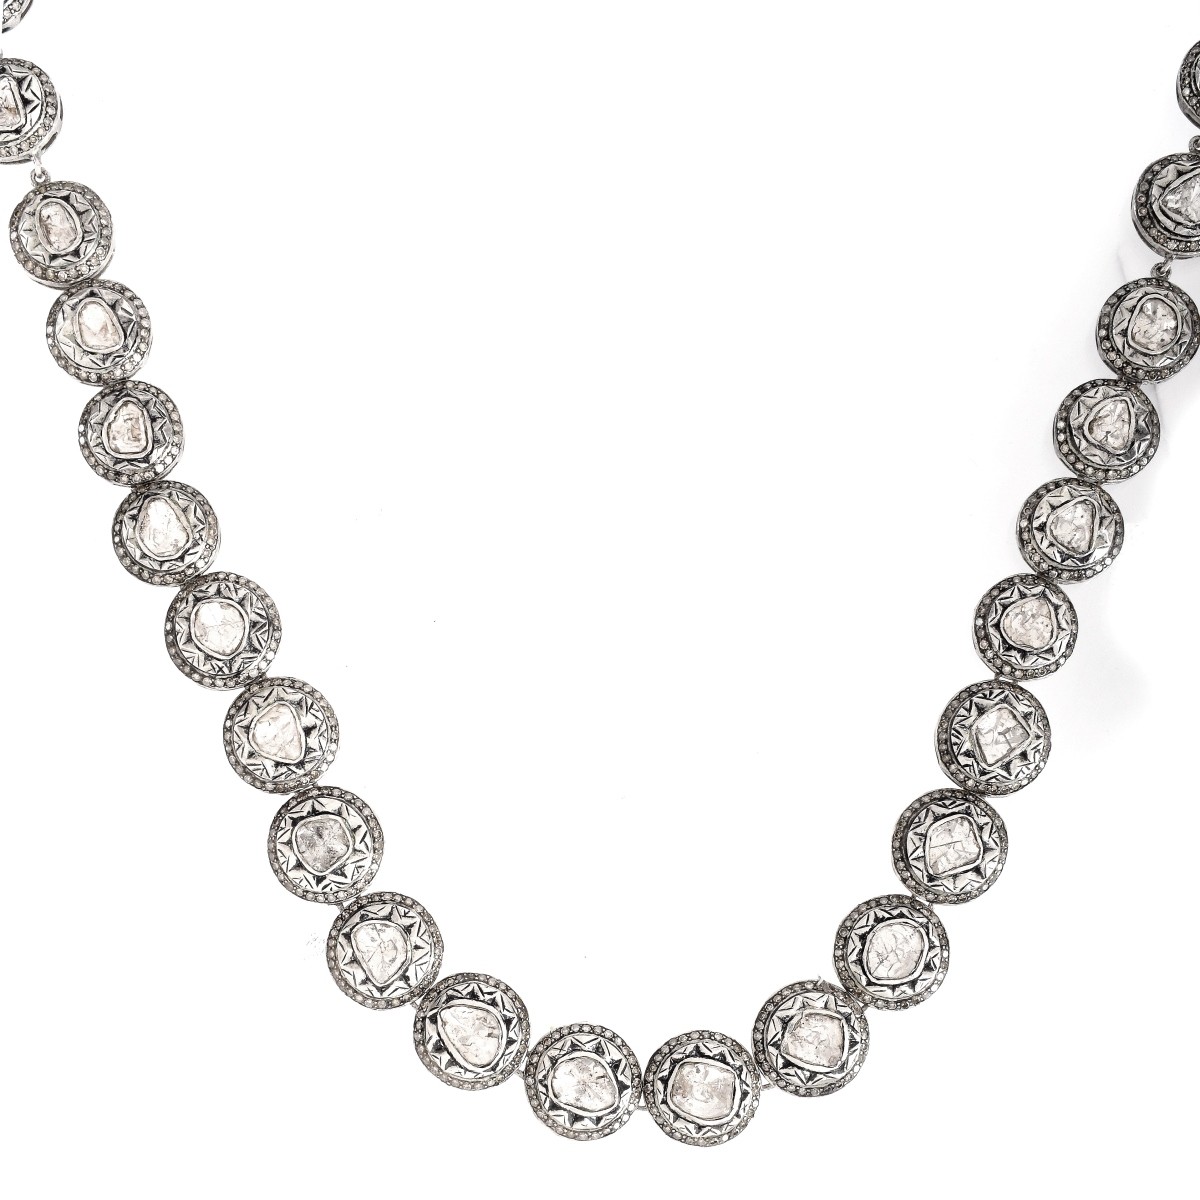 Vintage Diamond and Silver Necklace | Kodner Auctions